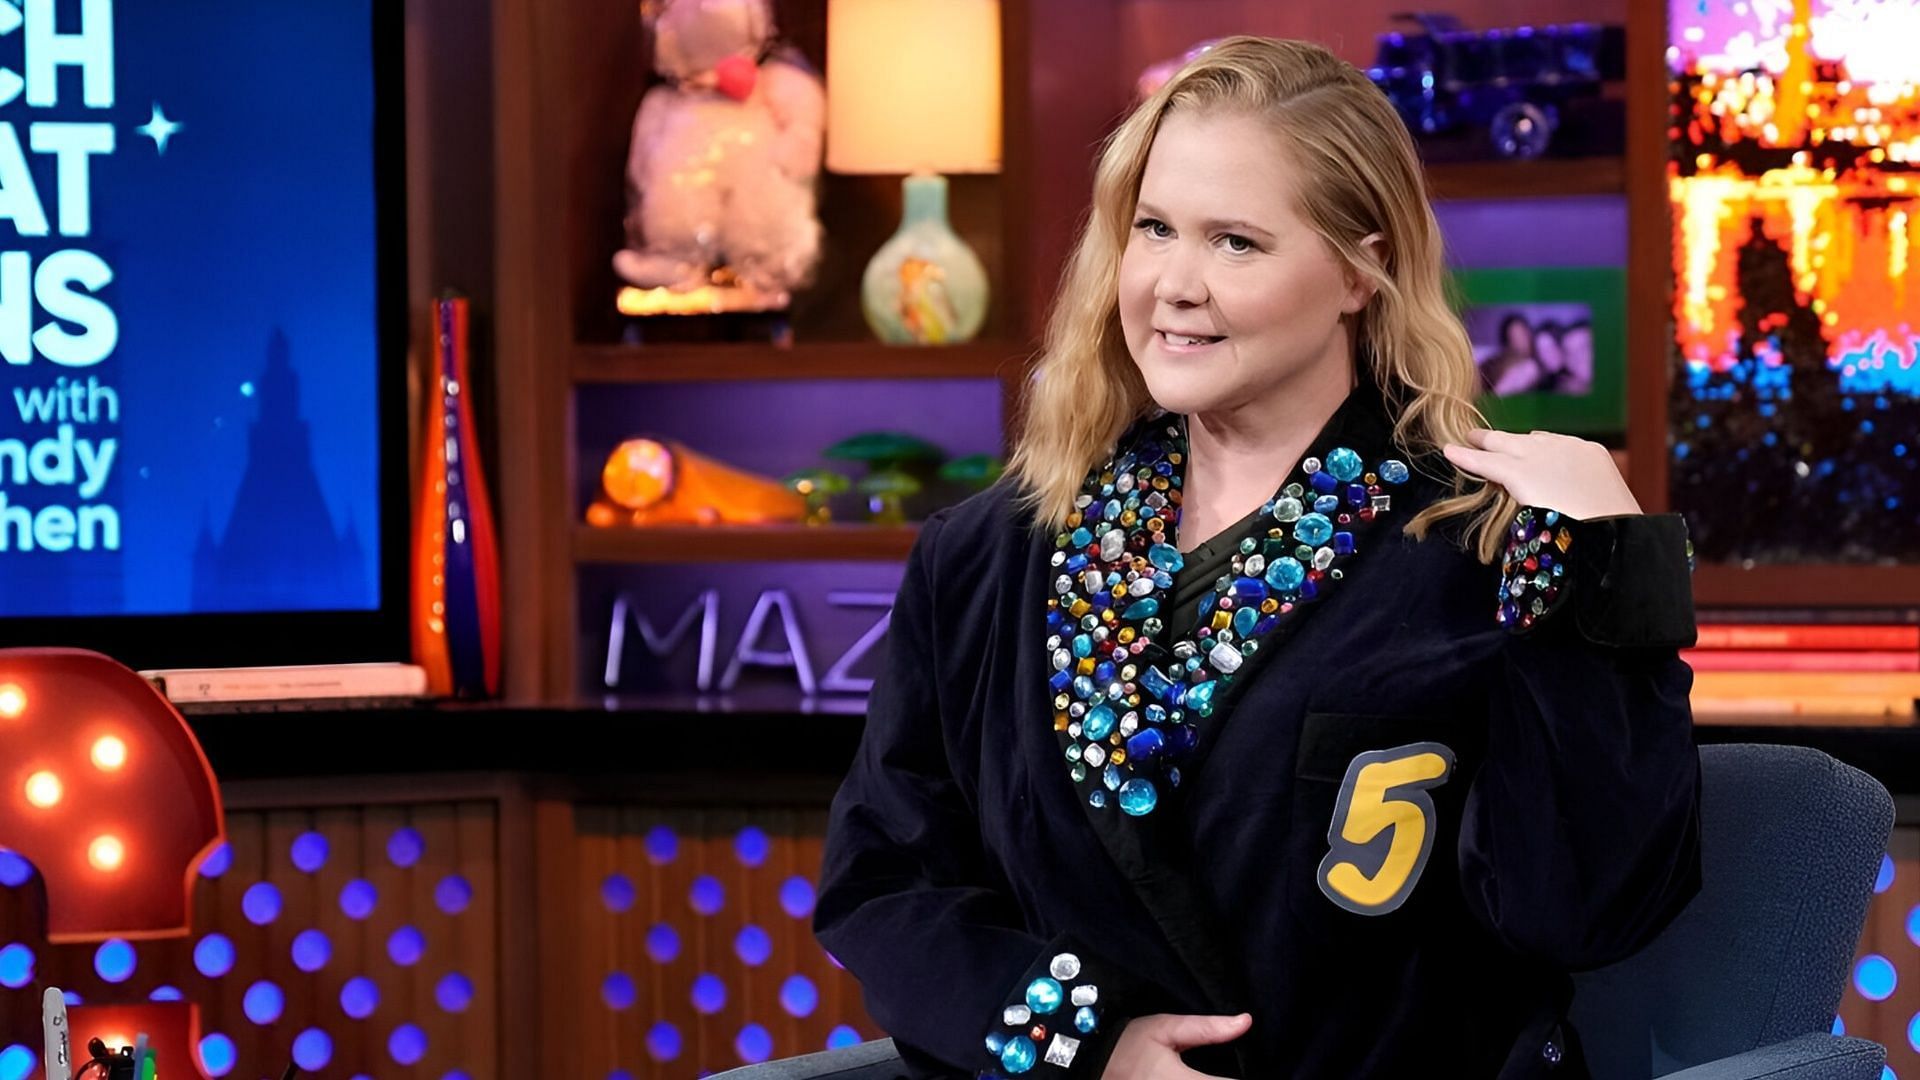 Internet defends Amy Schumer against body-shamers after her recent appearance on Jimmy Fallon